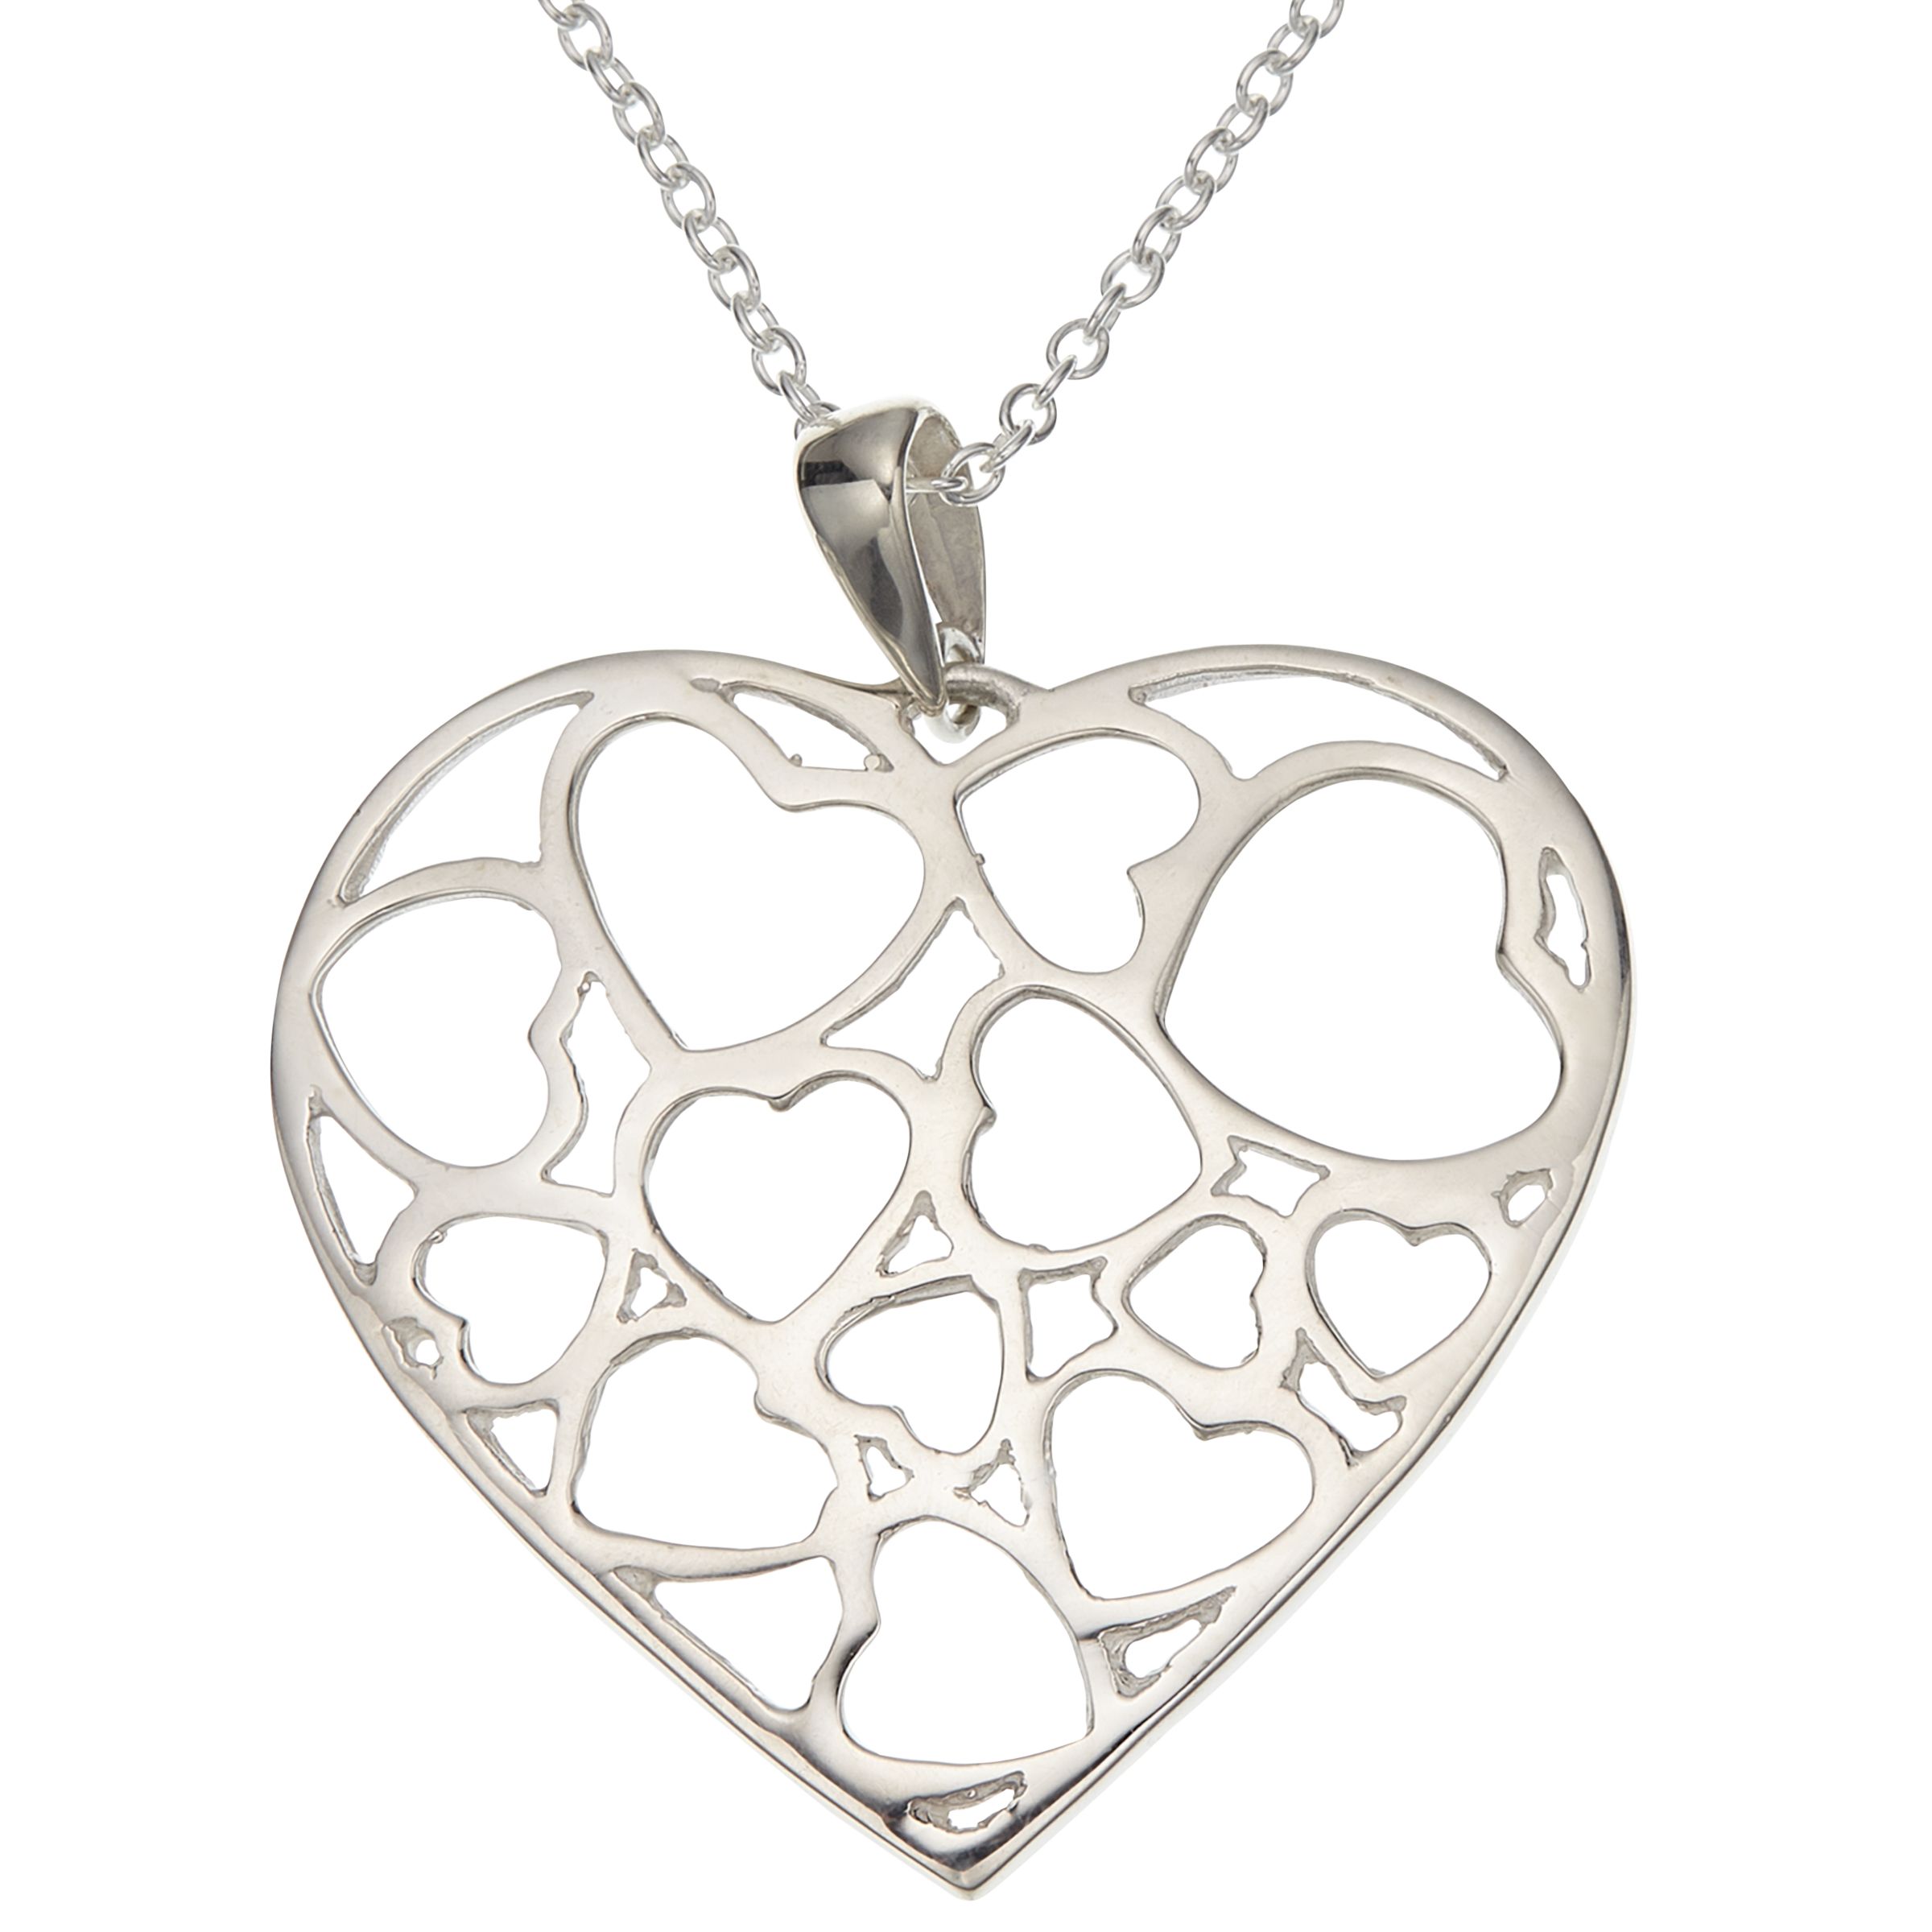 Andea Large Cut-Out Heart Pendant Necklace, Silver at John Lewis & Partners